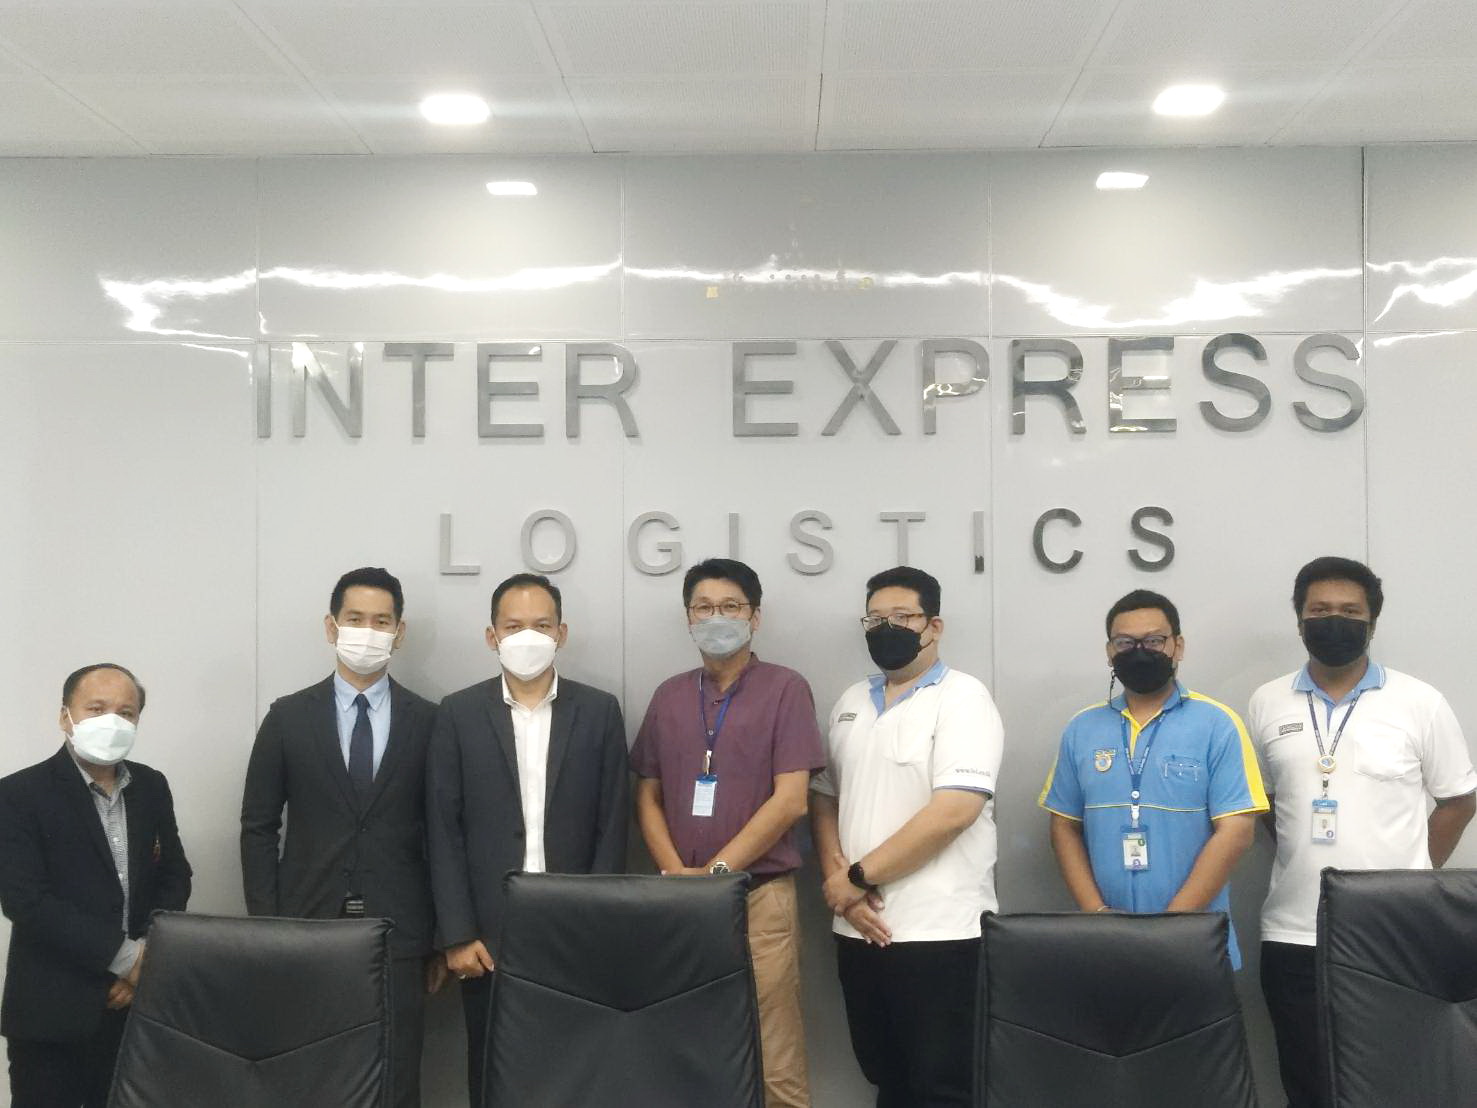 Discussions on cooperation in teaching, learning academic service, and cooperation with Suan Sunandha Logistics and Supply Chain Professional Association together with Inter Express Logistics Co., Ltd.